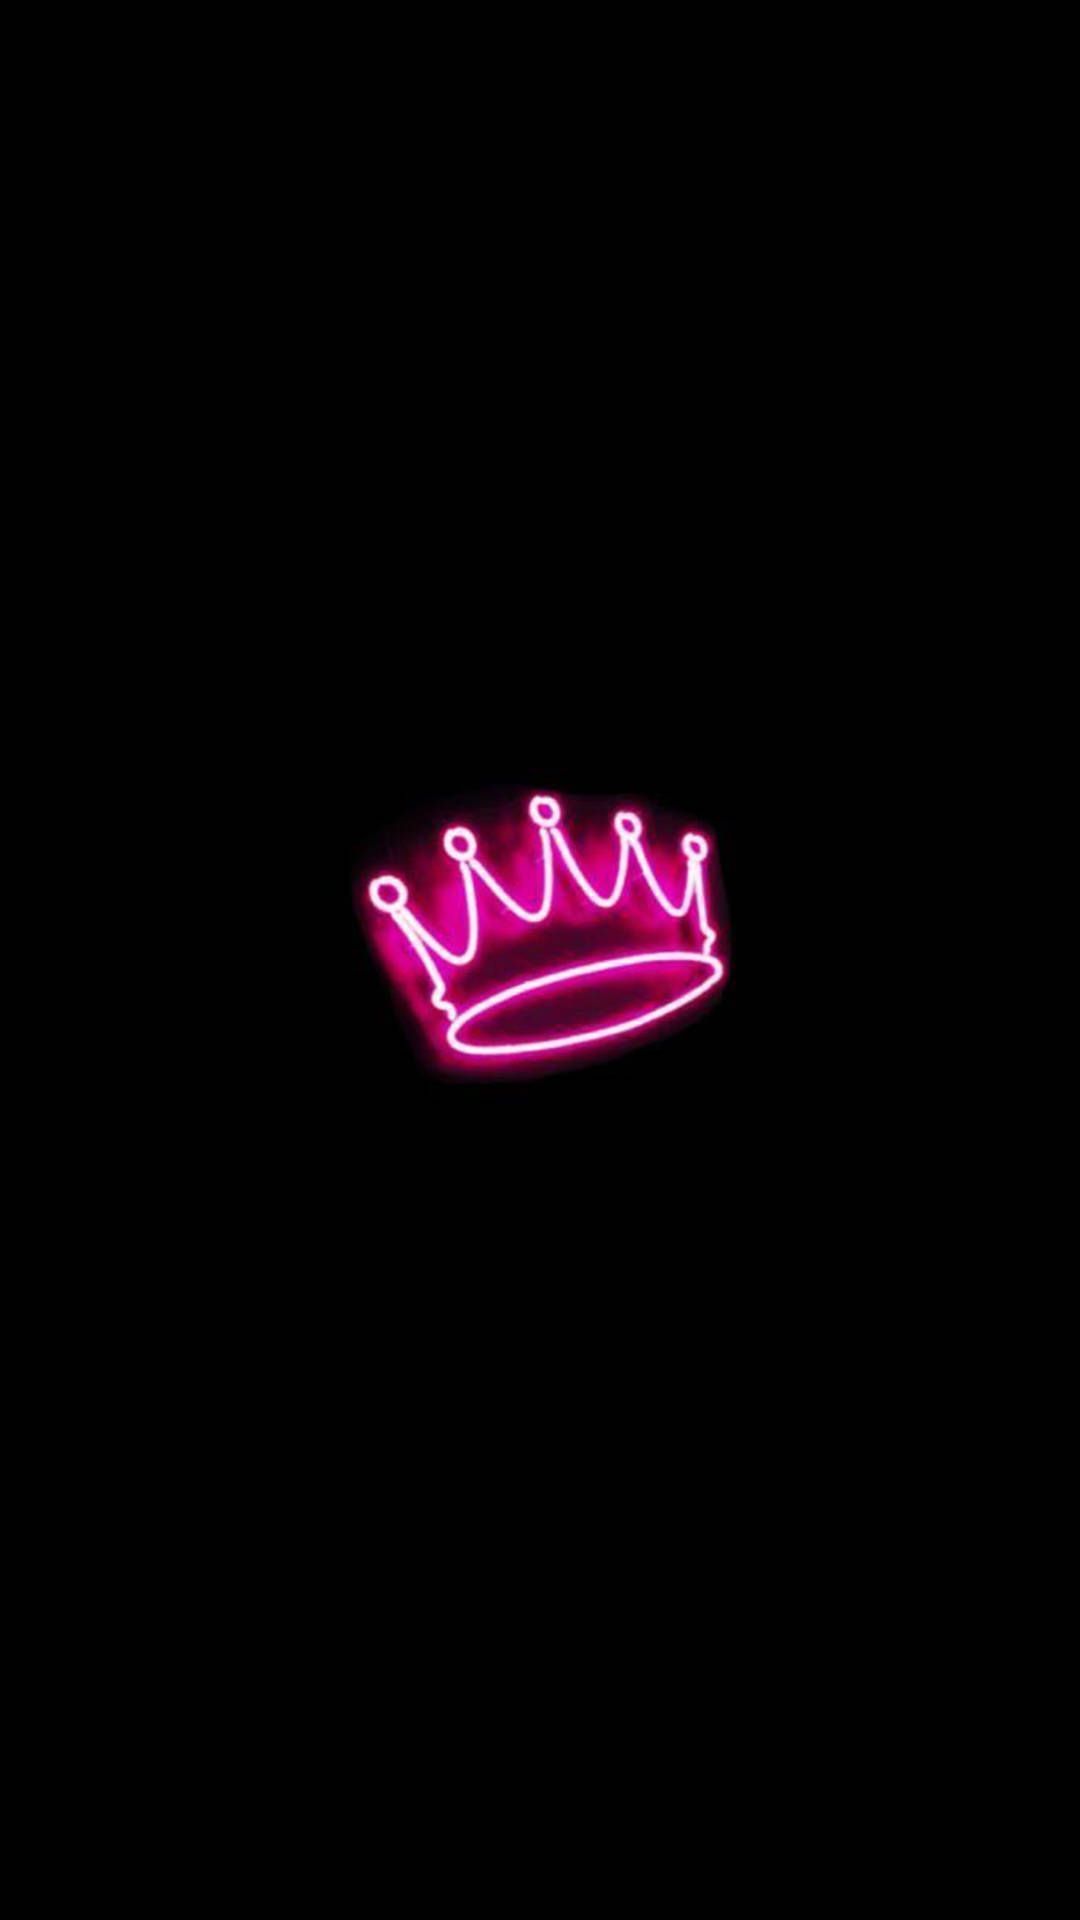 A neon pink crown on black background - Hot pink, crown